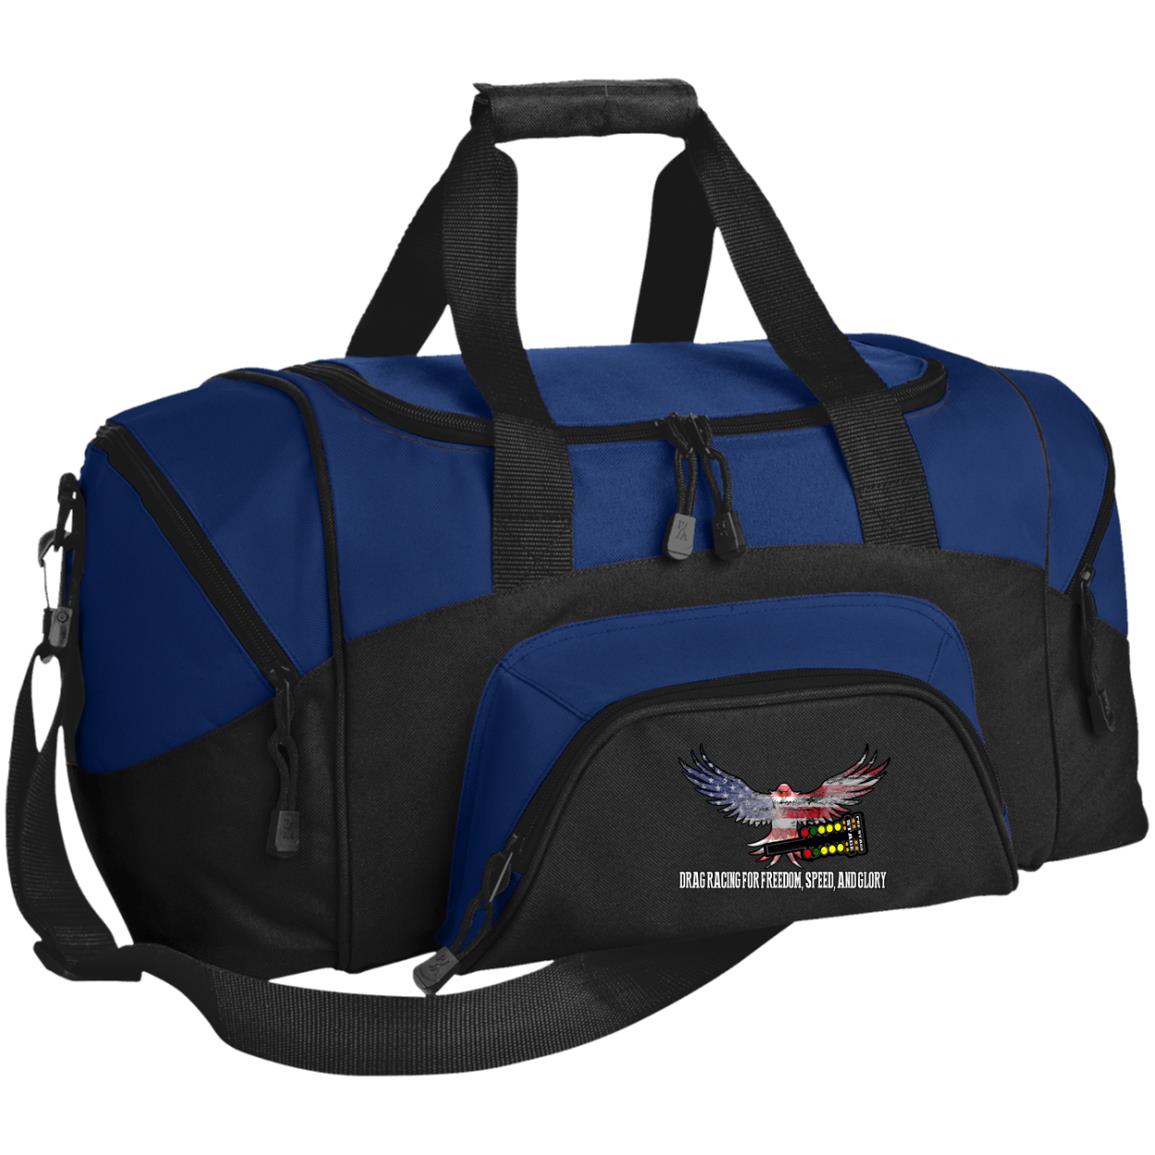 Drag Racing for Freedom, Speed, and Glory Small Colorblock Sport Duffel Bag